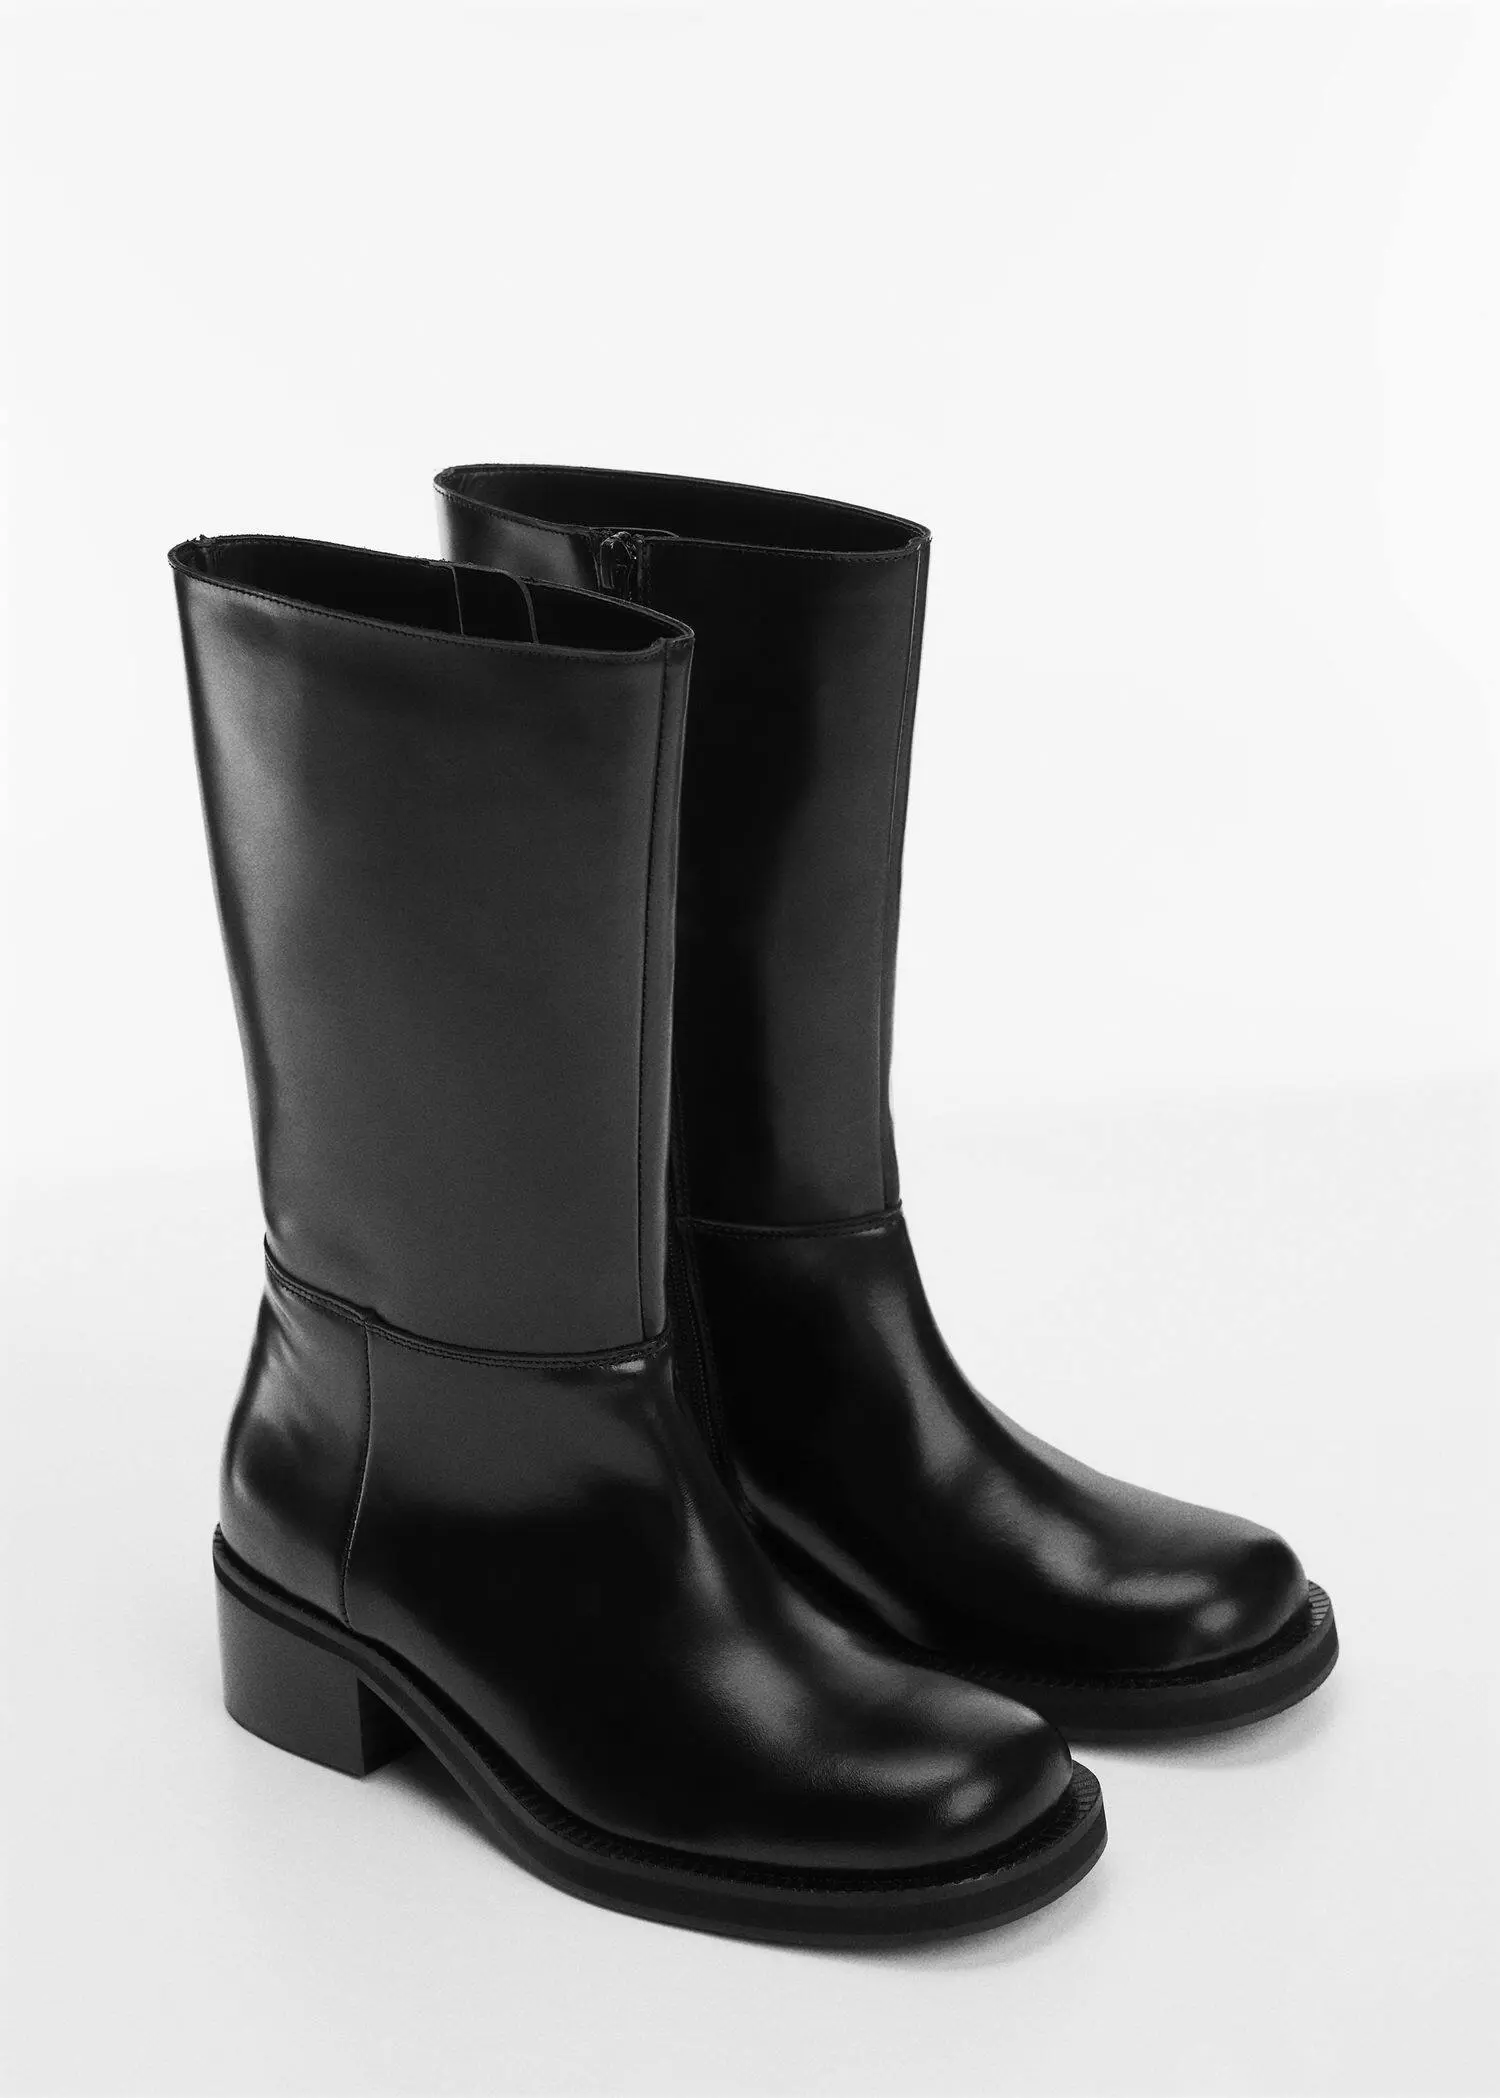 Mango Leather boots with zipper closure. 3